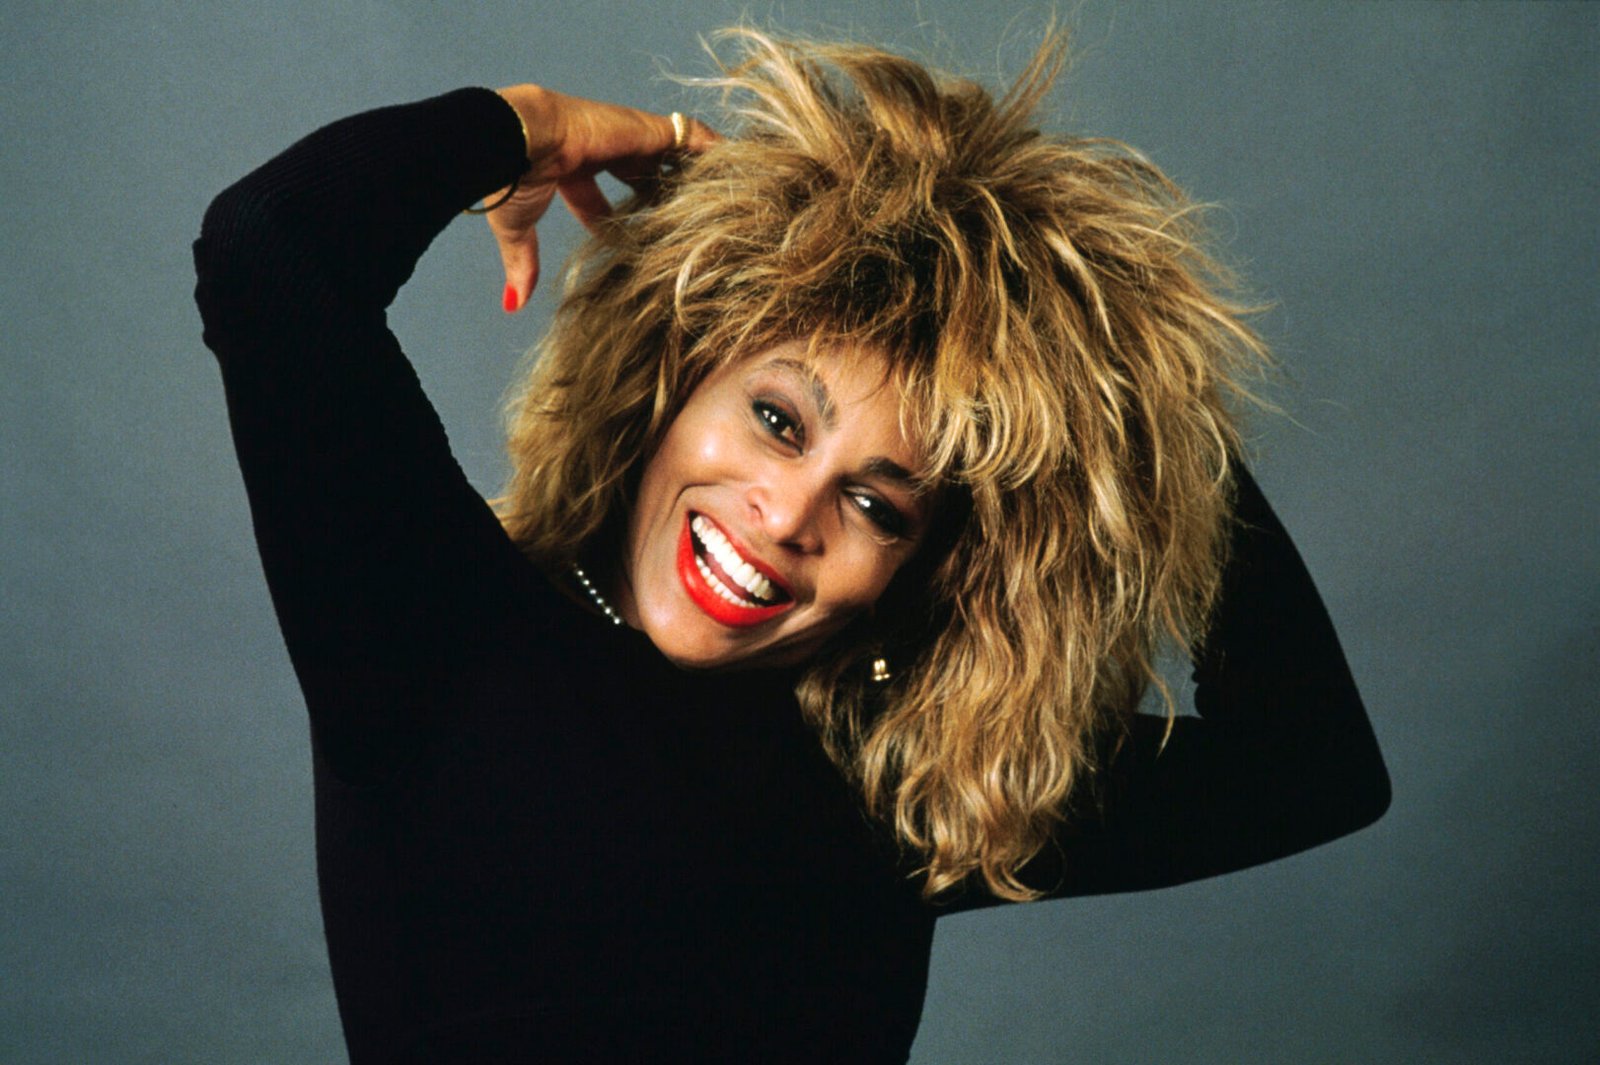 Beyoncé will pay tribute to Tina Turner after being accused of ‘mocking’ her abuse